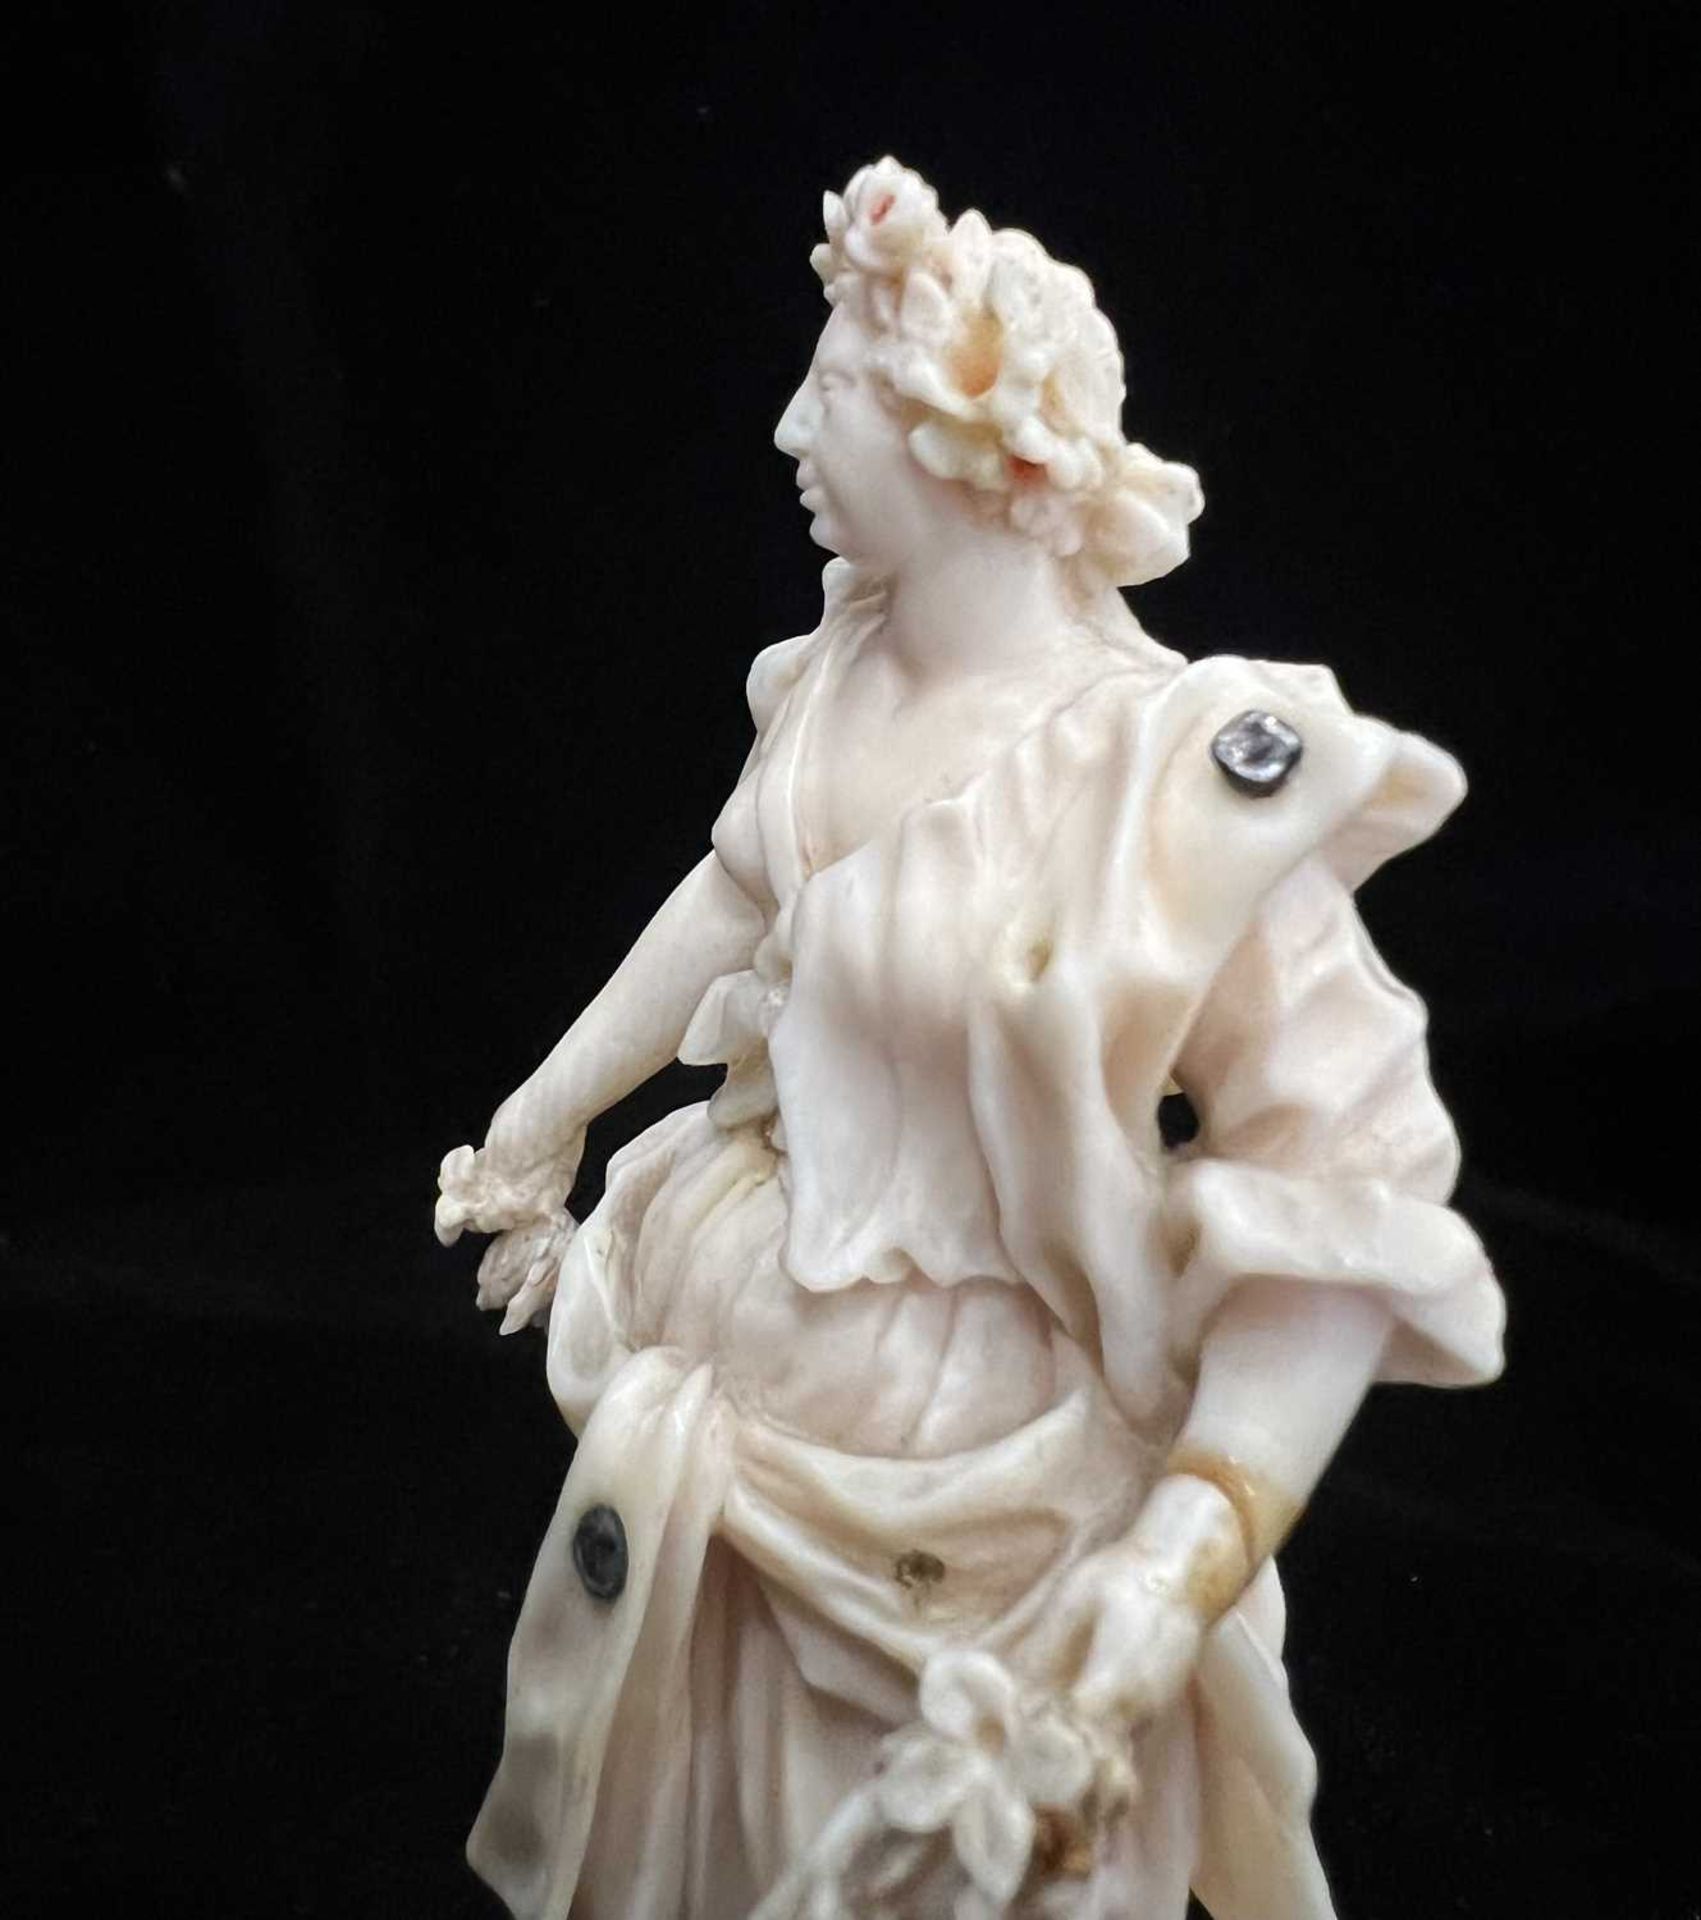 H.R.H PRINCESS MARGARET'S WEDDING GIFT: A PAIR OF 18TH CENTURY IVORY FIGURES OF SPRING AND AUTUMN - Image 5 of 14